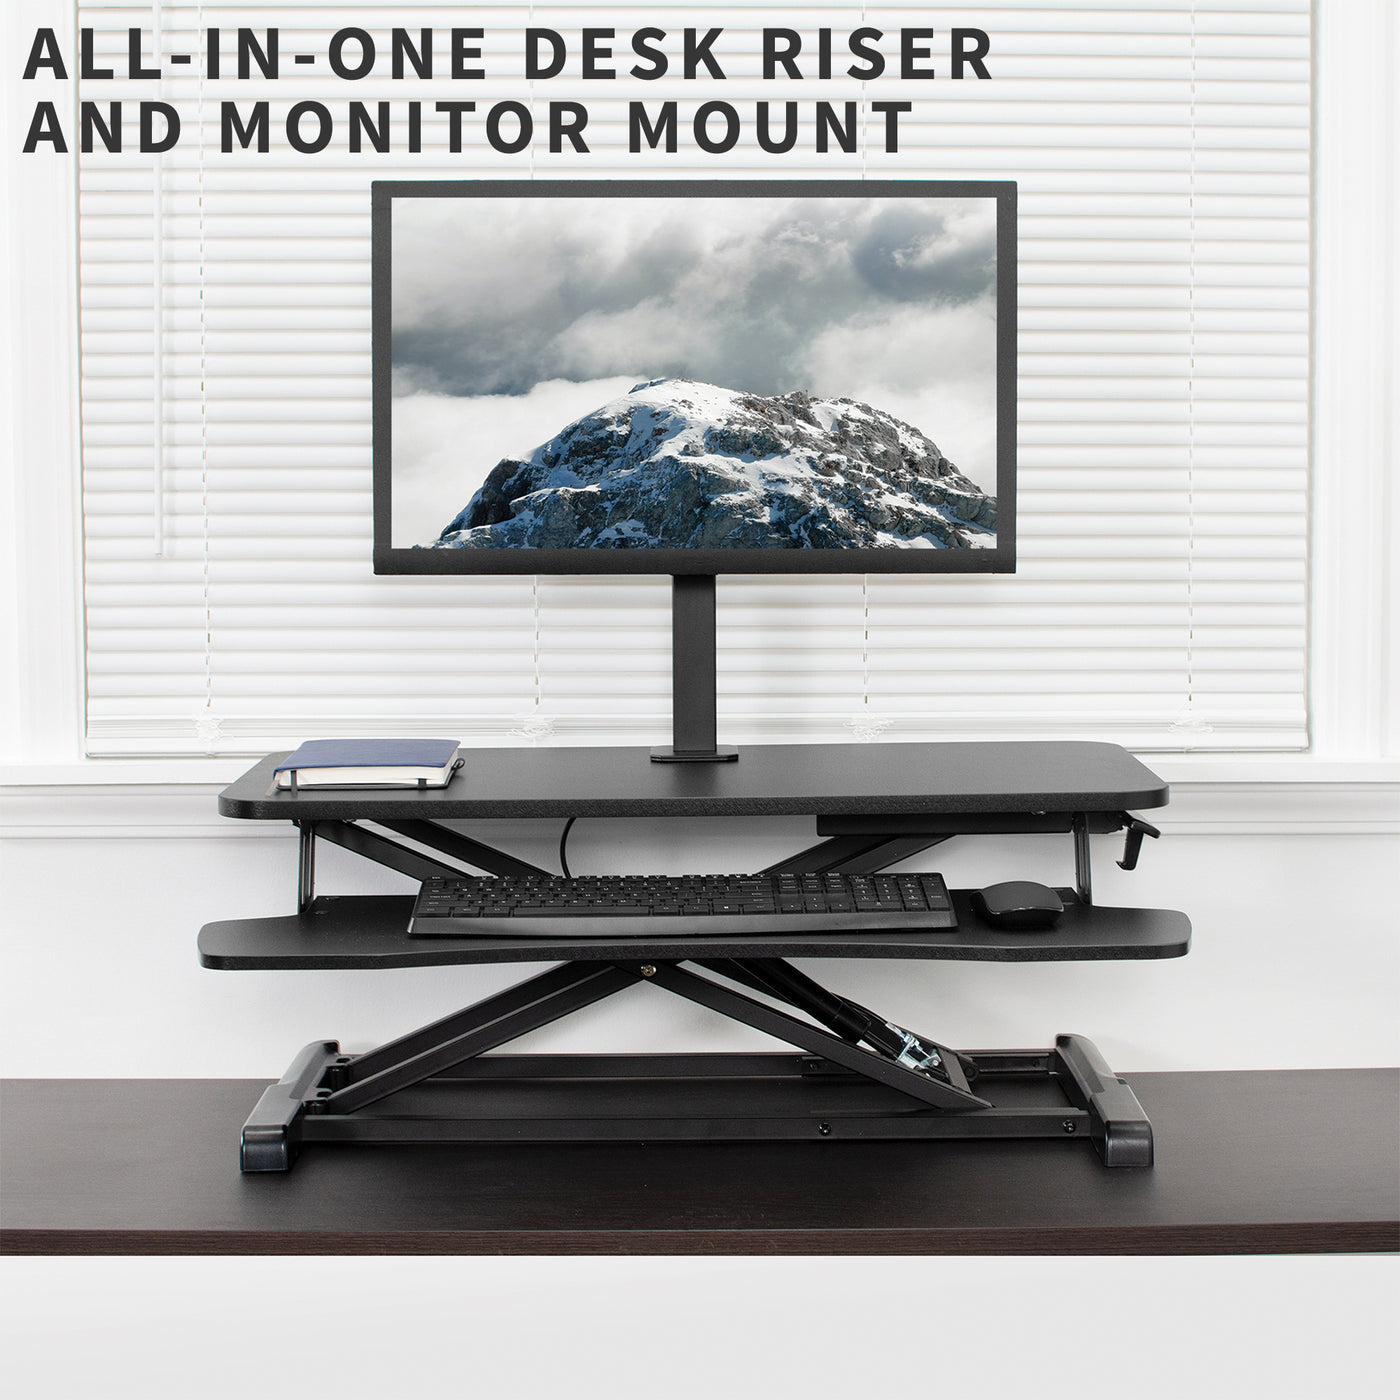 Keyboard tray and monitor mount desk riser that will transform your workspace from sitting to standing at the touch of a hand.